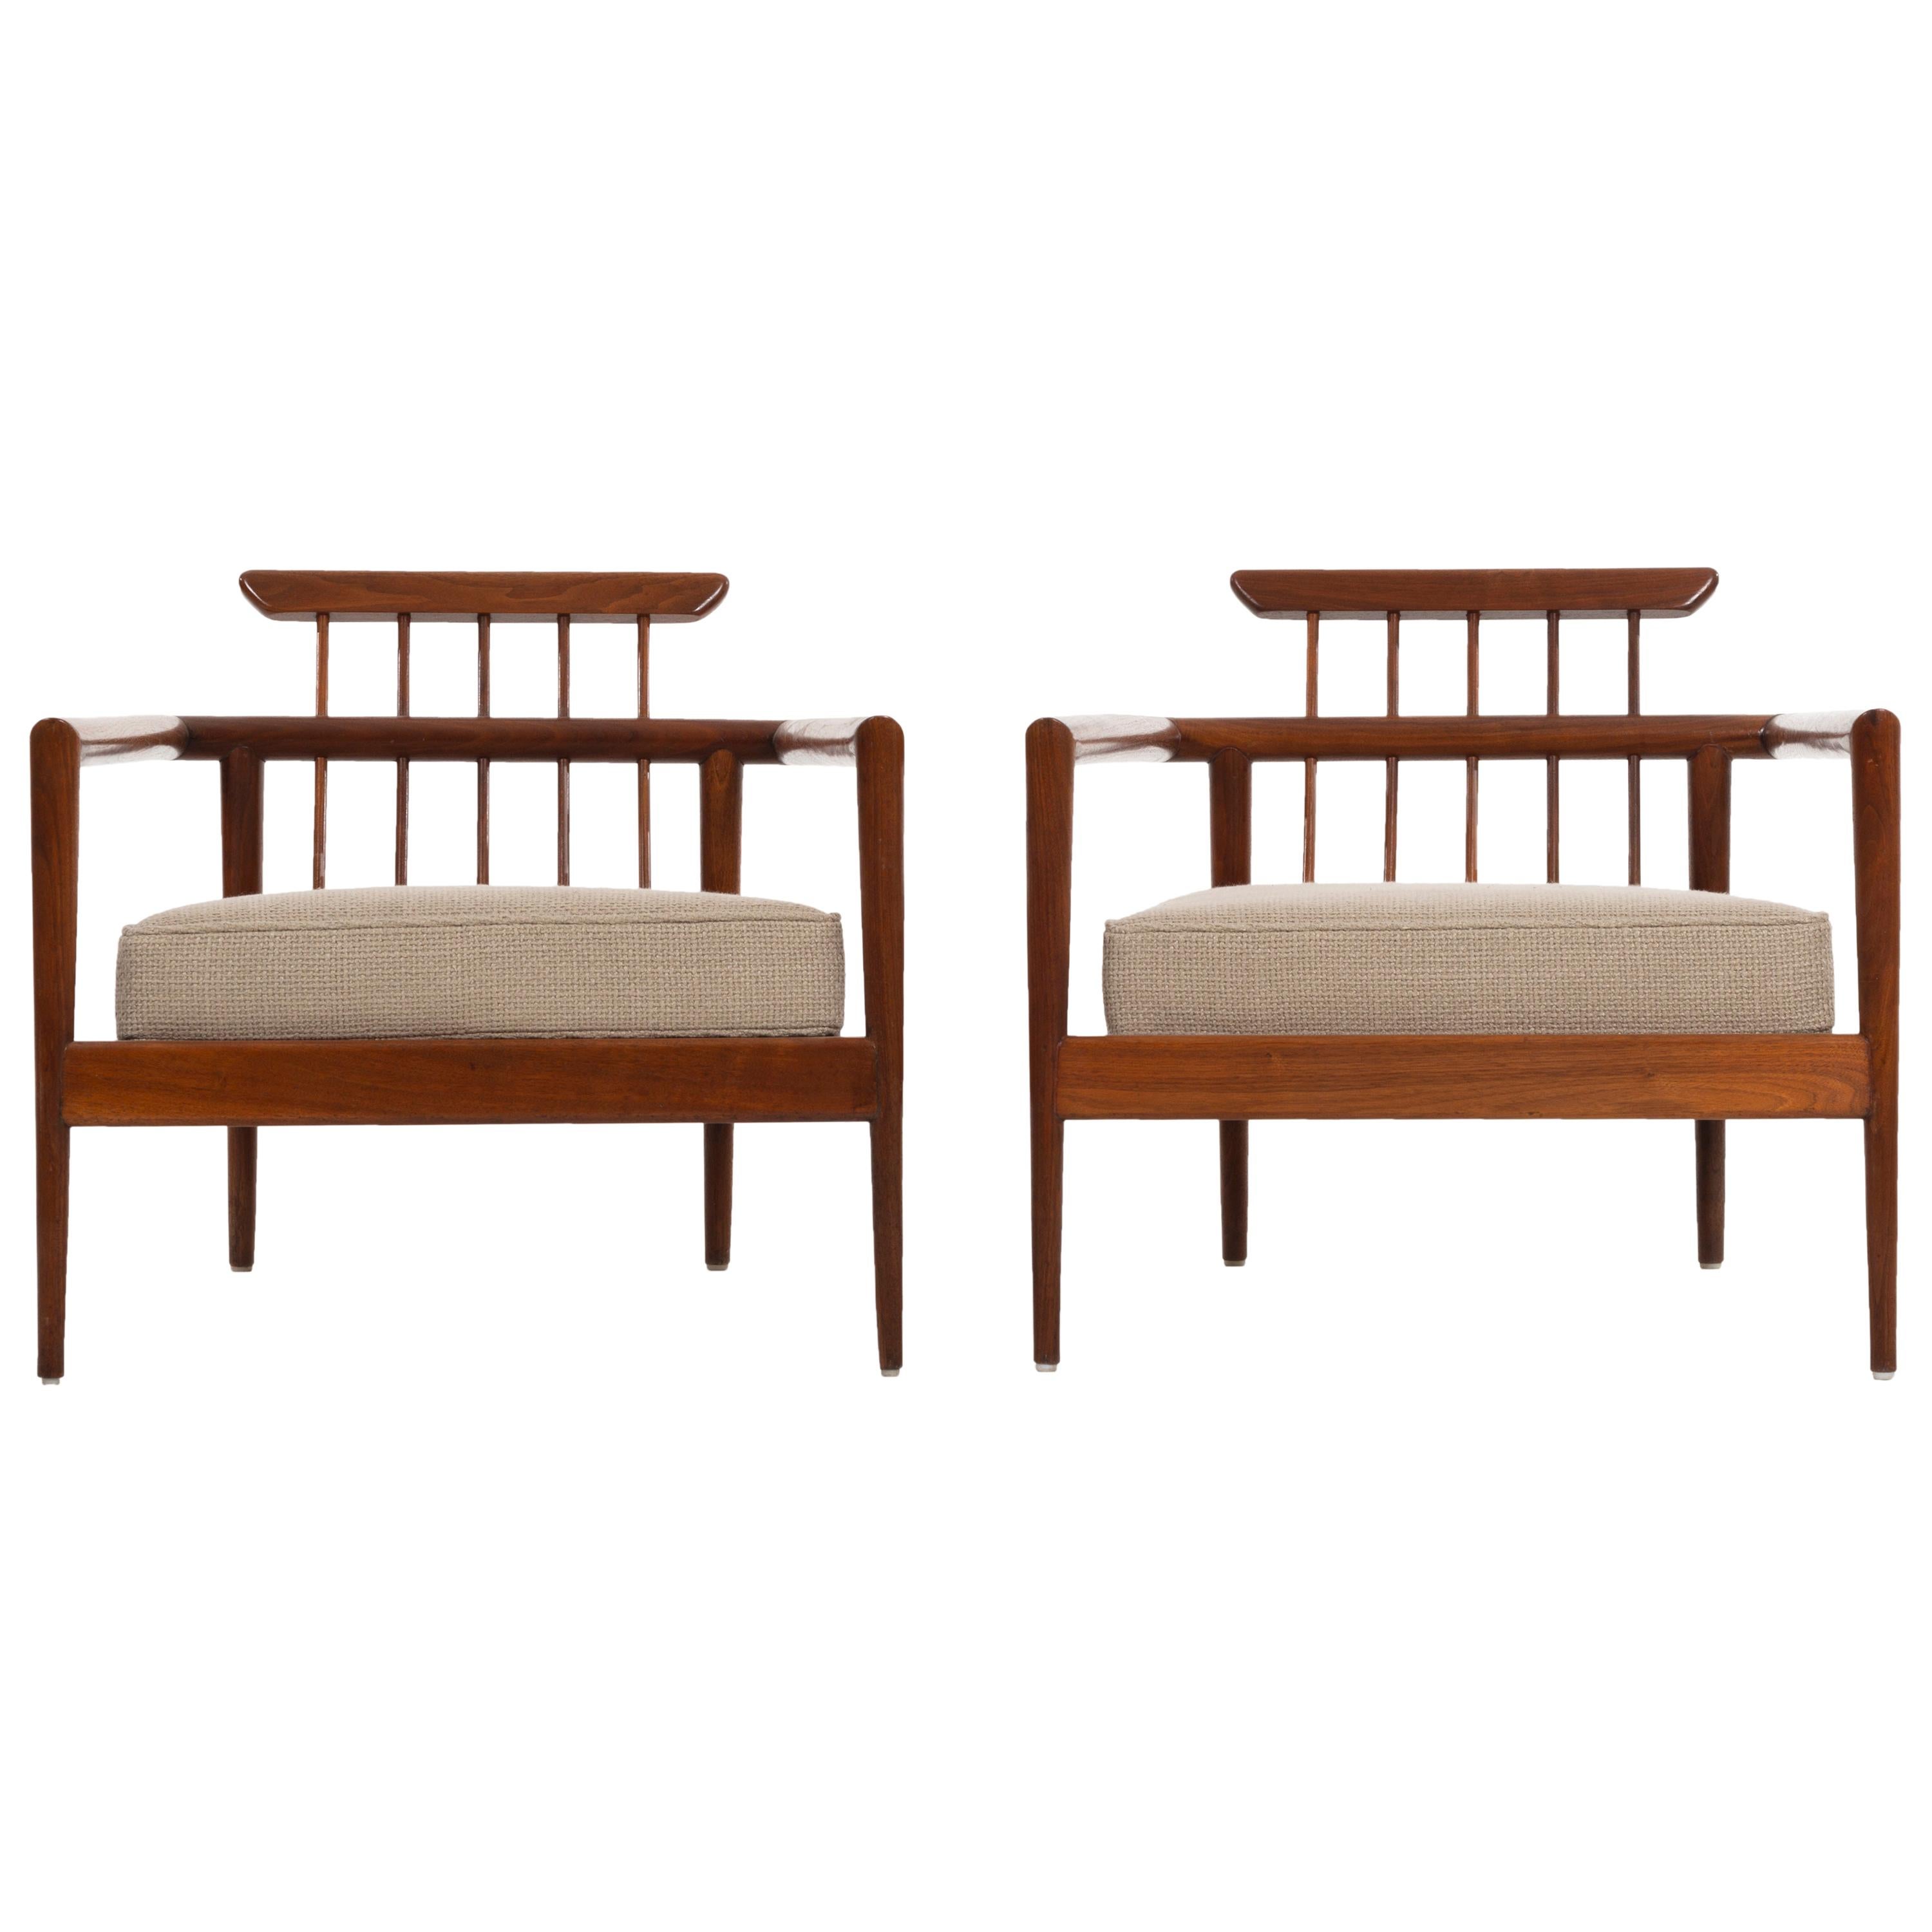 Pair of Edmond Spence Lounge Chairs